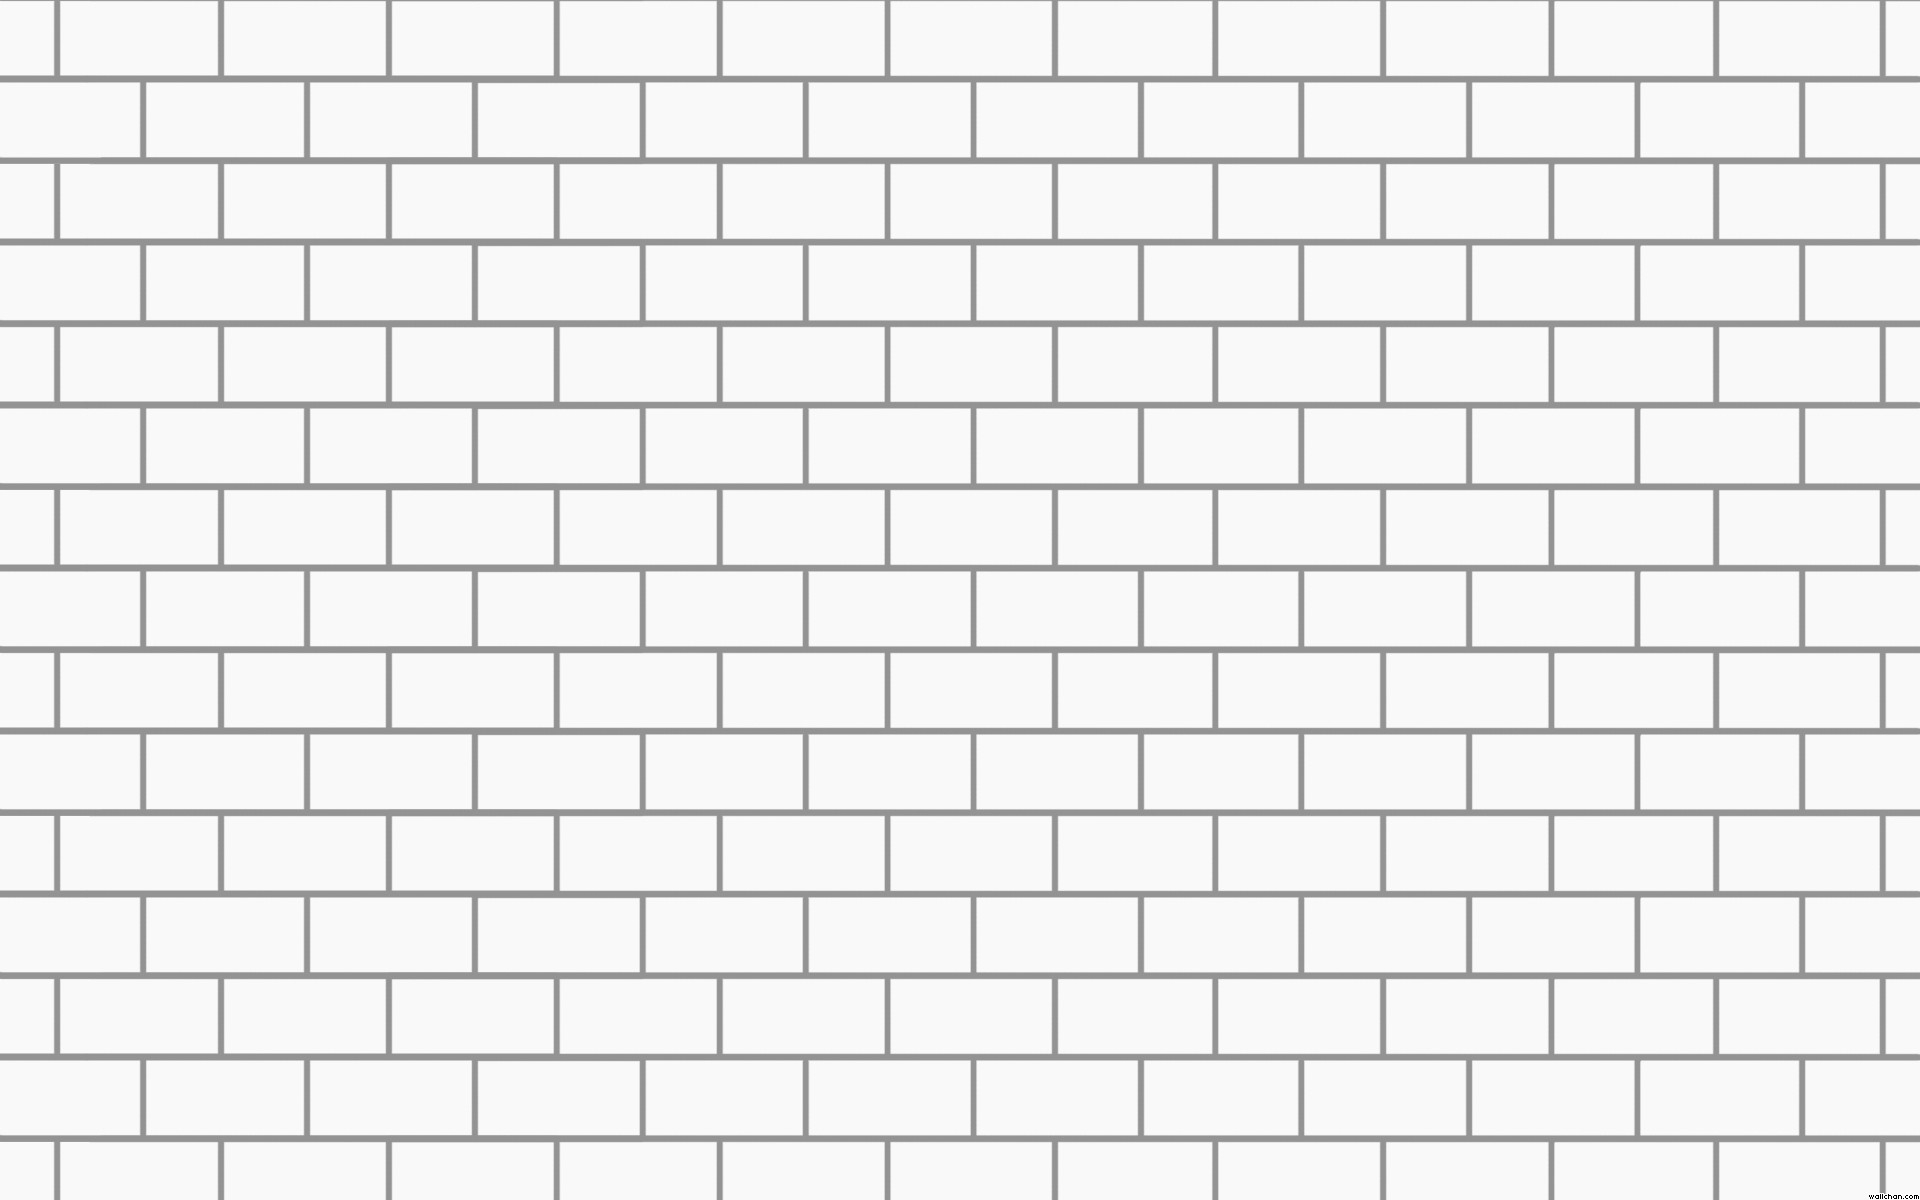 1920x1200 Wallpaper : drawing, digital art, abstract, minimalism, wall, bricks, white background, music, line art, pattern, album covers, Pink Floyd, psychedelic rock, shape, font maharaj 99660 HD Wallpapers